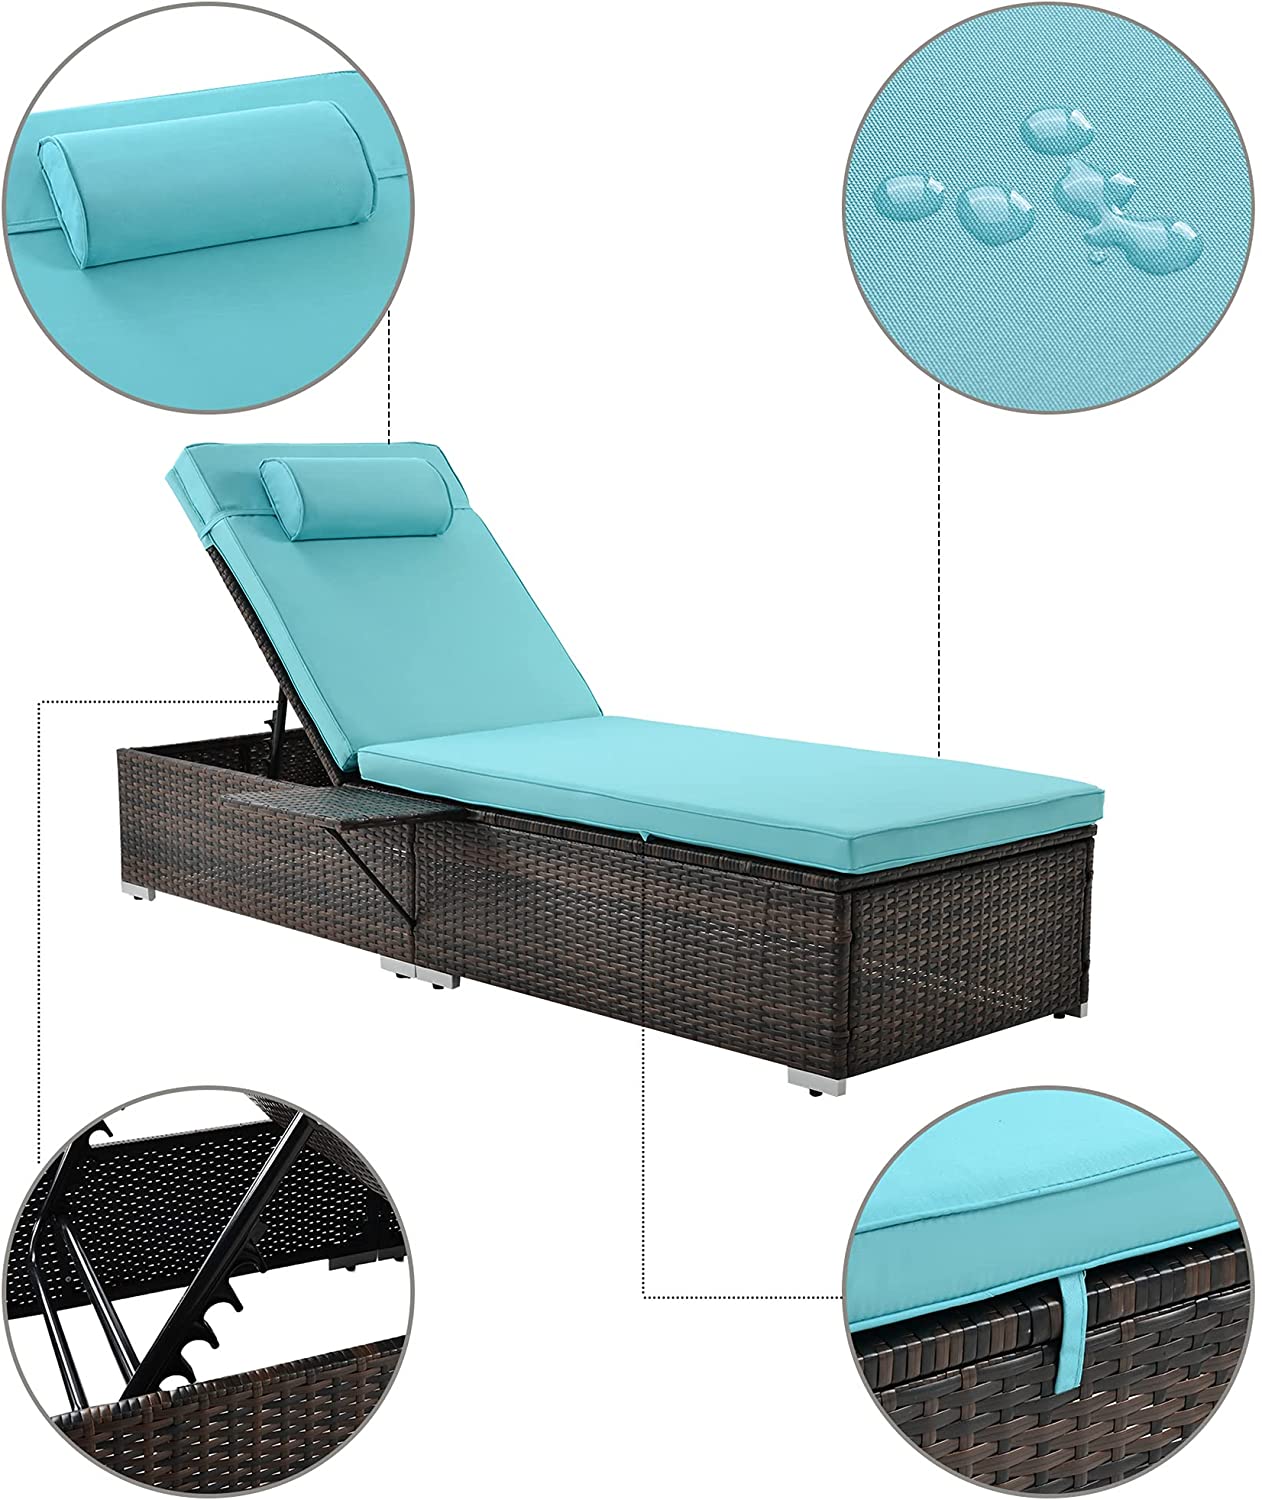 Outdoor PE Wicker Chaise Lounge, 2 Piece Patio Brown Rattan Reclining Chair Furniture Set, Adjustable Backrest Recliners with Side Table and Comfort Head Pillow(Blue) - image 4 of 18